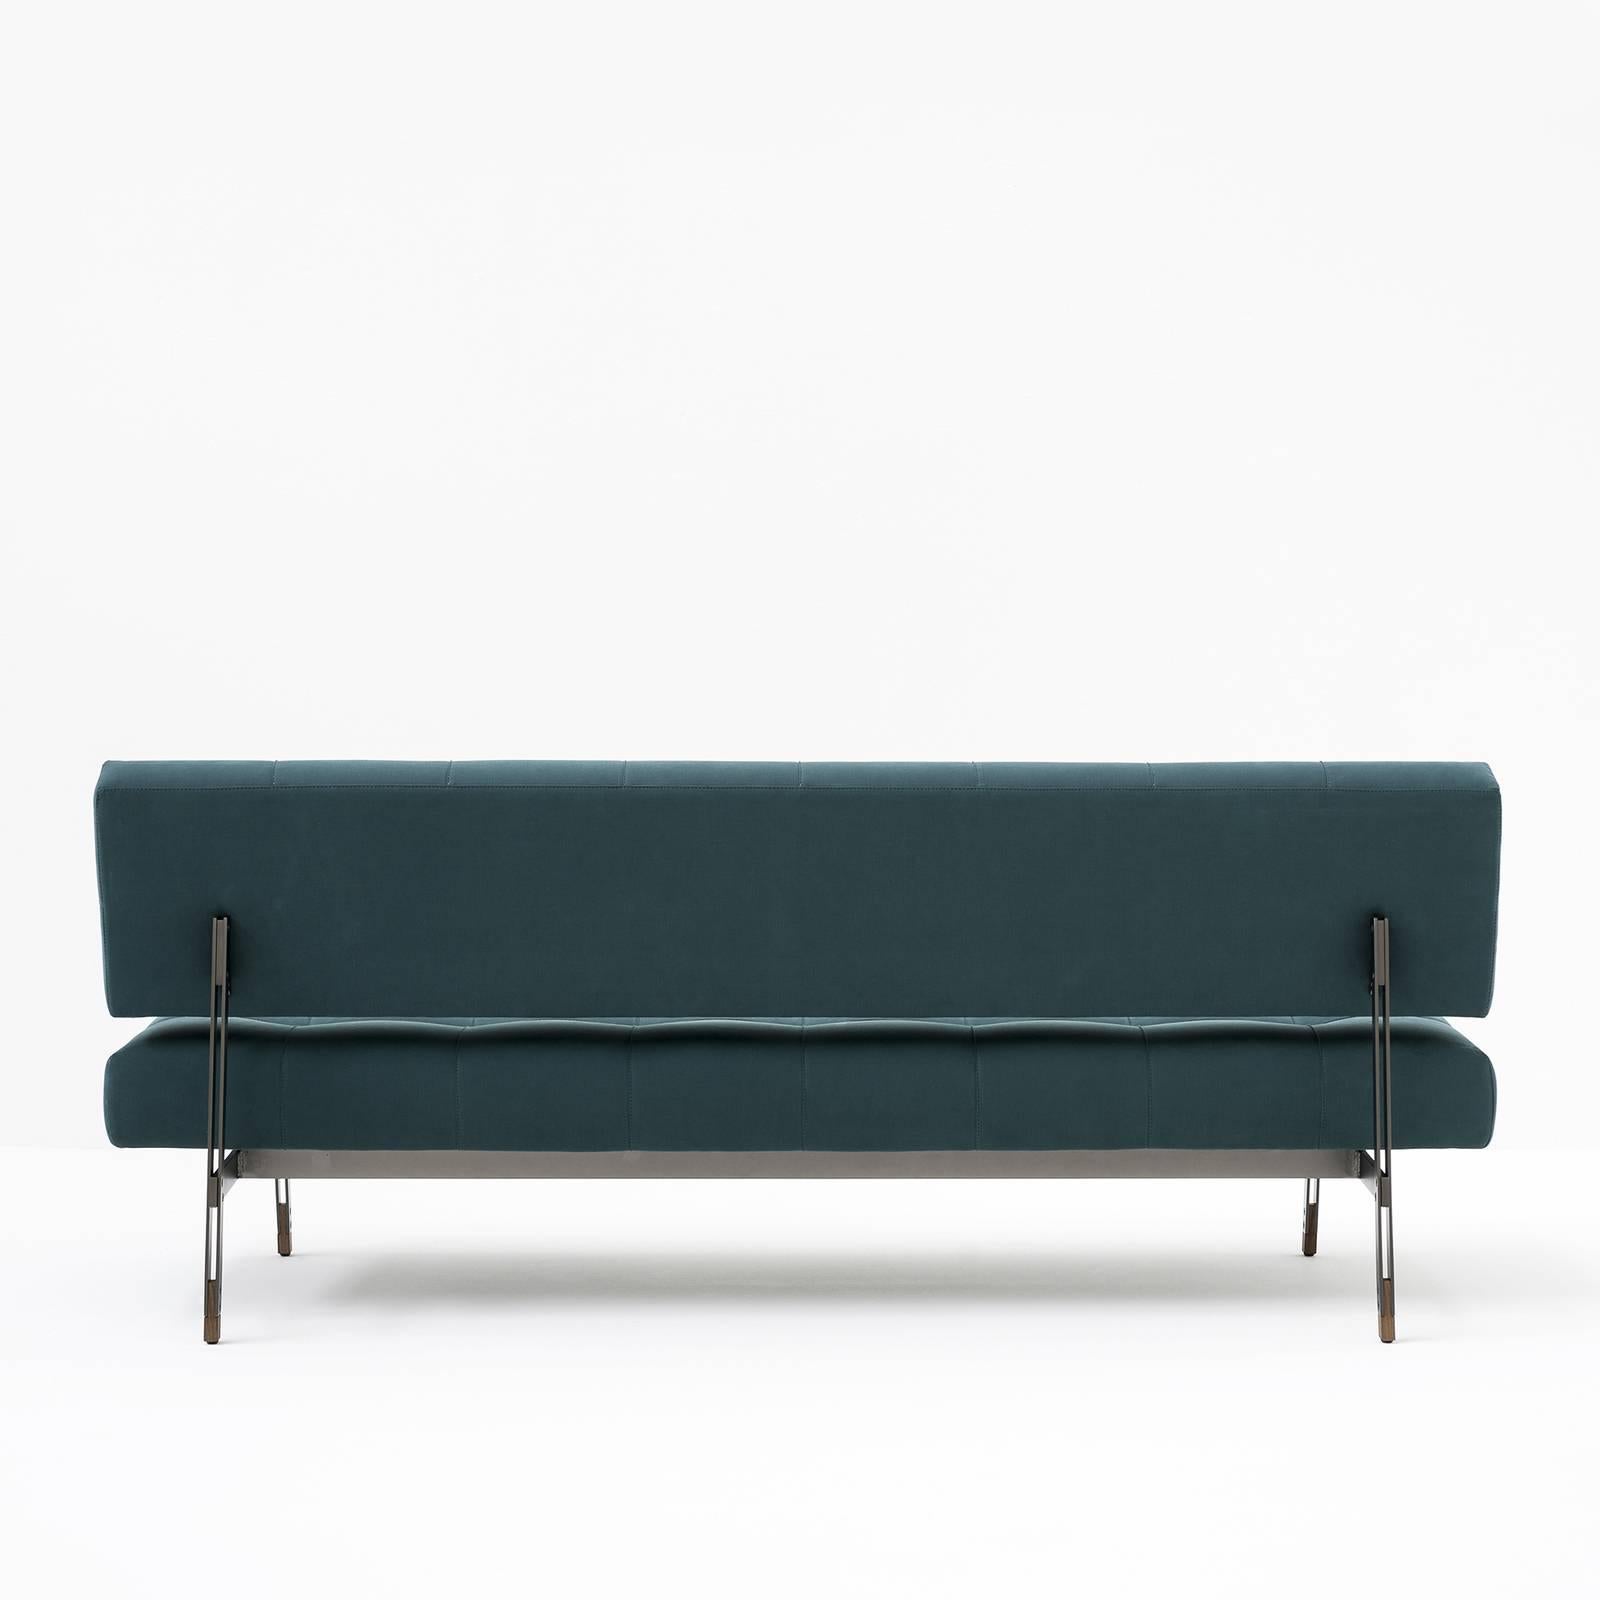 Elegant and timeless, this sofa will be a precious addition to a contemporary decor, where it will bring a pop of color, or a striking contrast in a Classic interior, thanks to its rigorous Silhouette and Minimalist lines. It was designed by